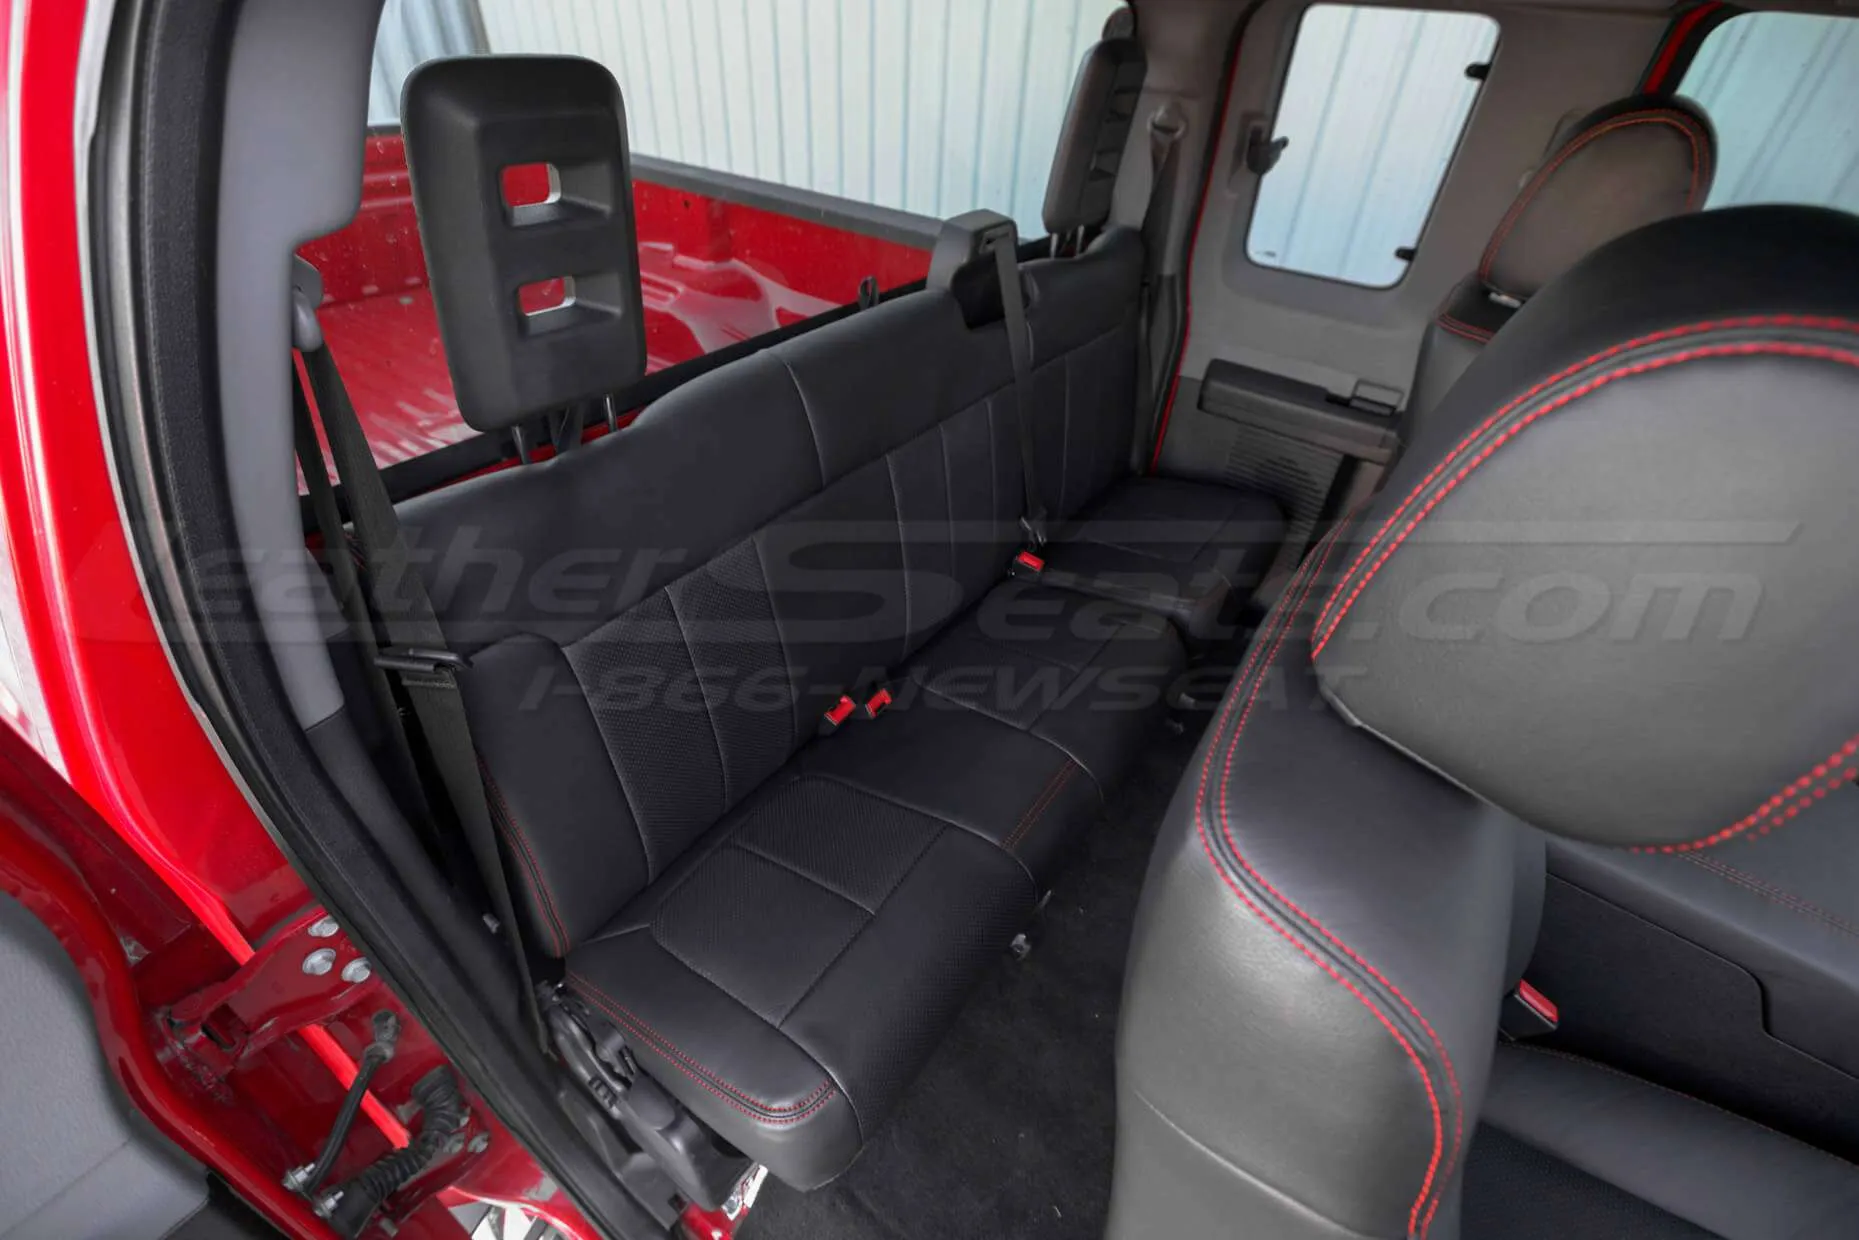 Ford Superduty Leather seats - Rear seats from passenger side